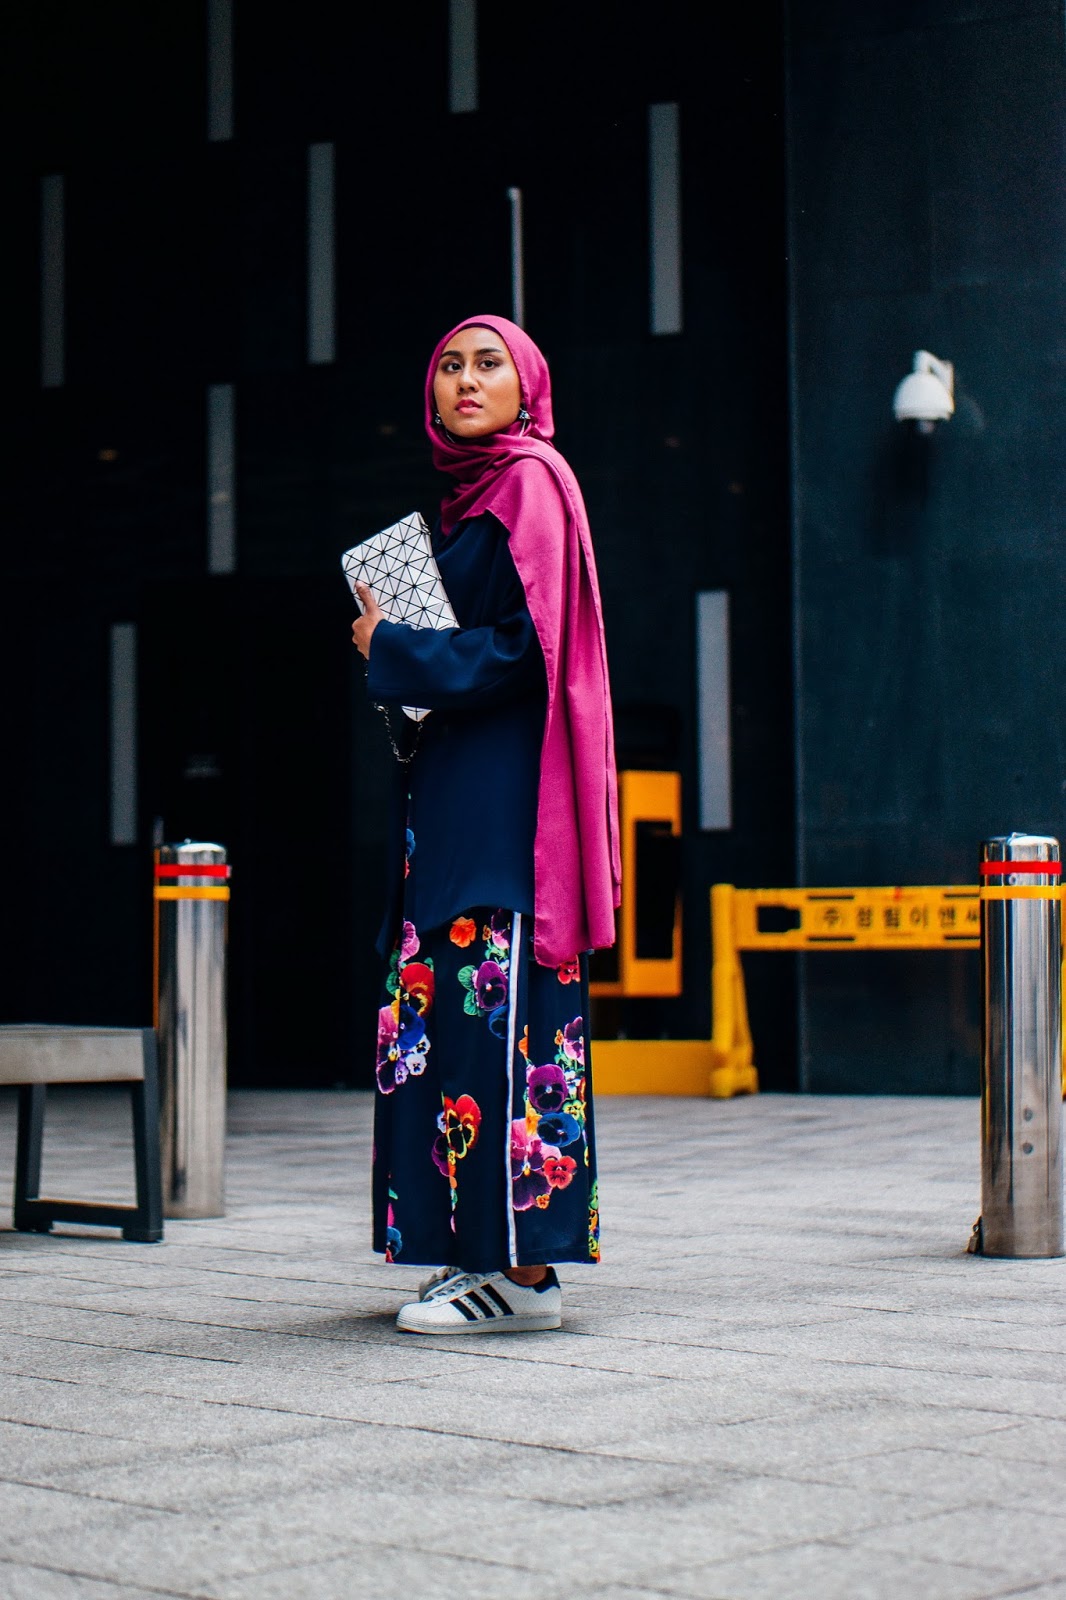 How Hijabis Can Wear Skirts Without Looking Too Girlish